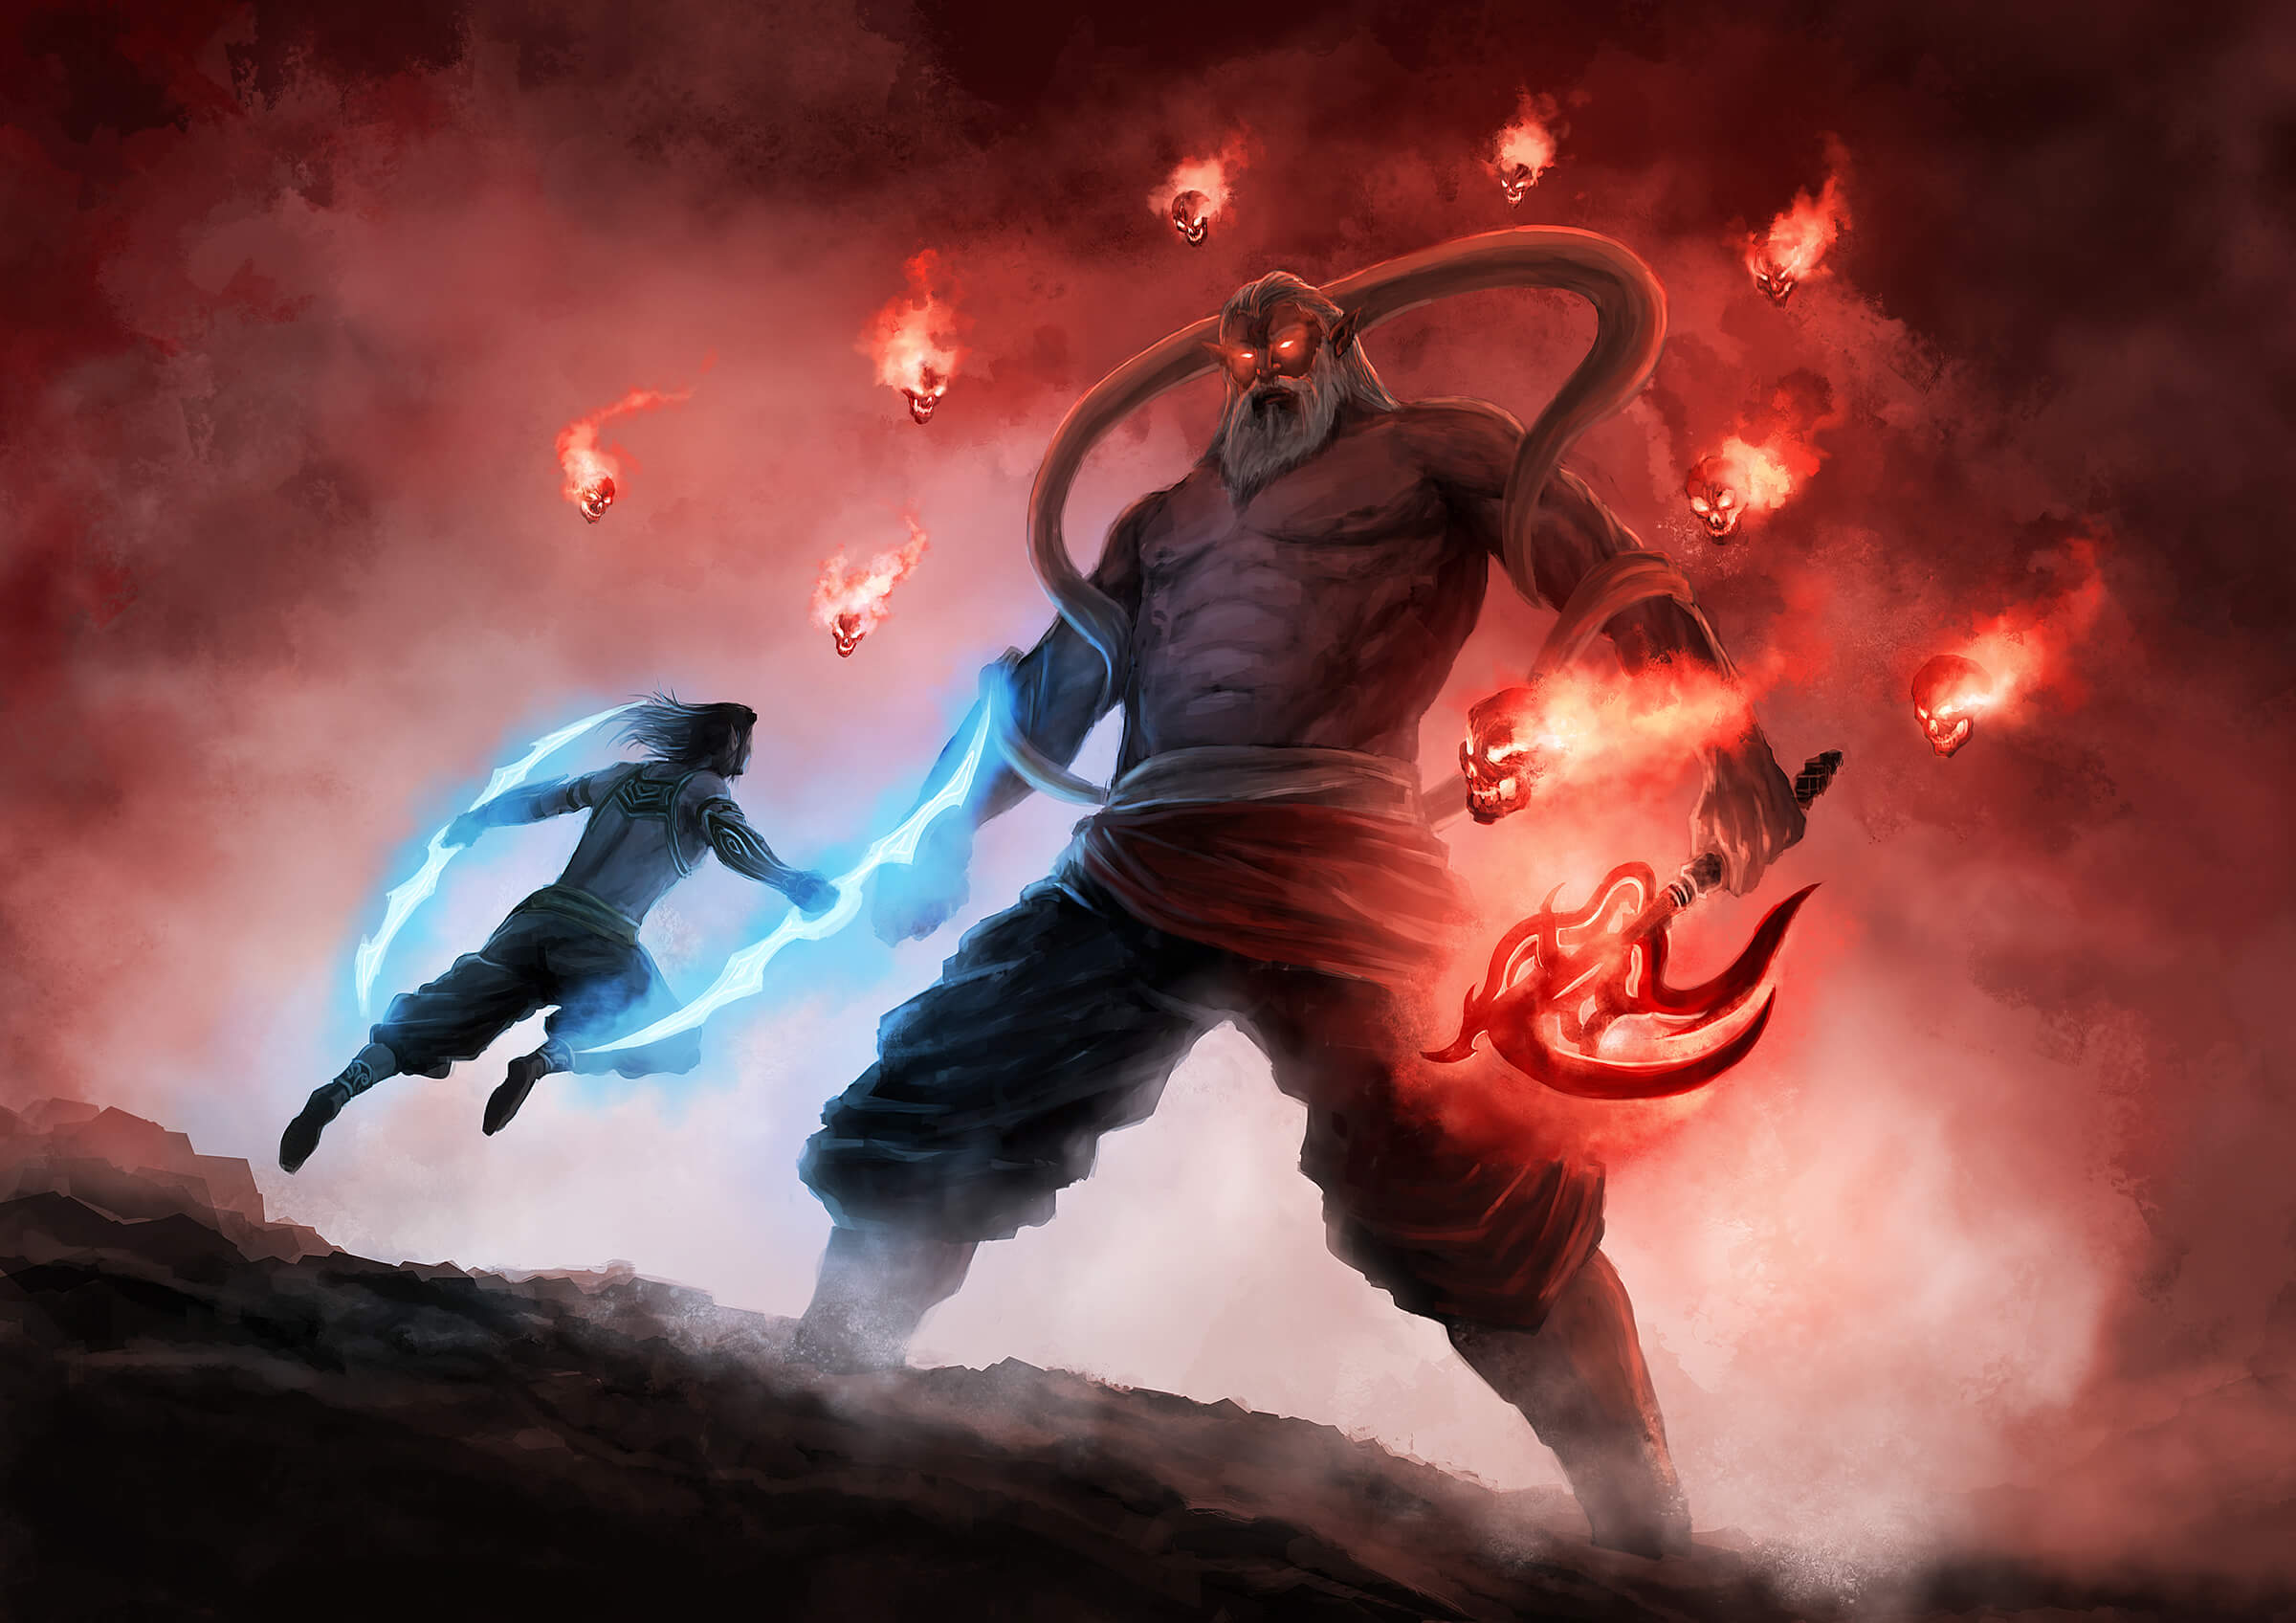 A man wielding glowing, double-sided blades leaps at an enormous, horned demon surrounded by flaming red skulls.